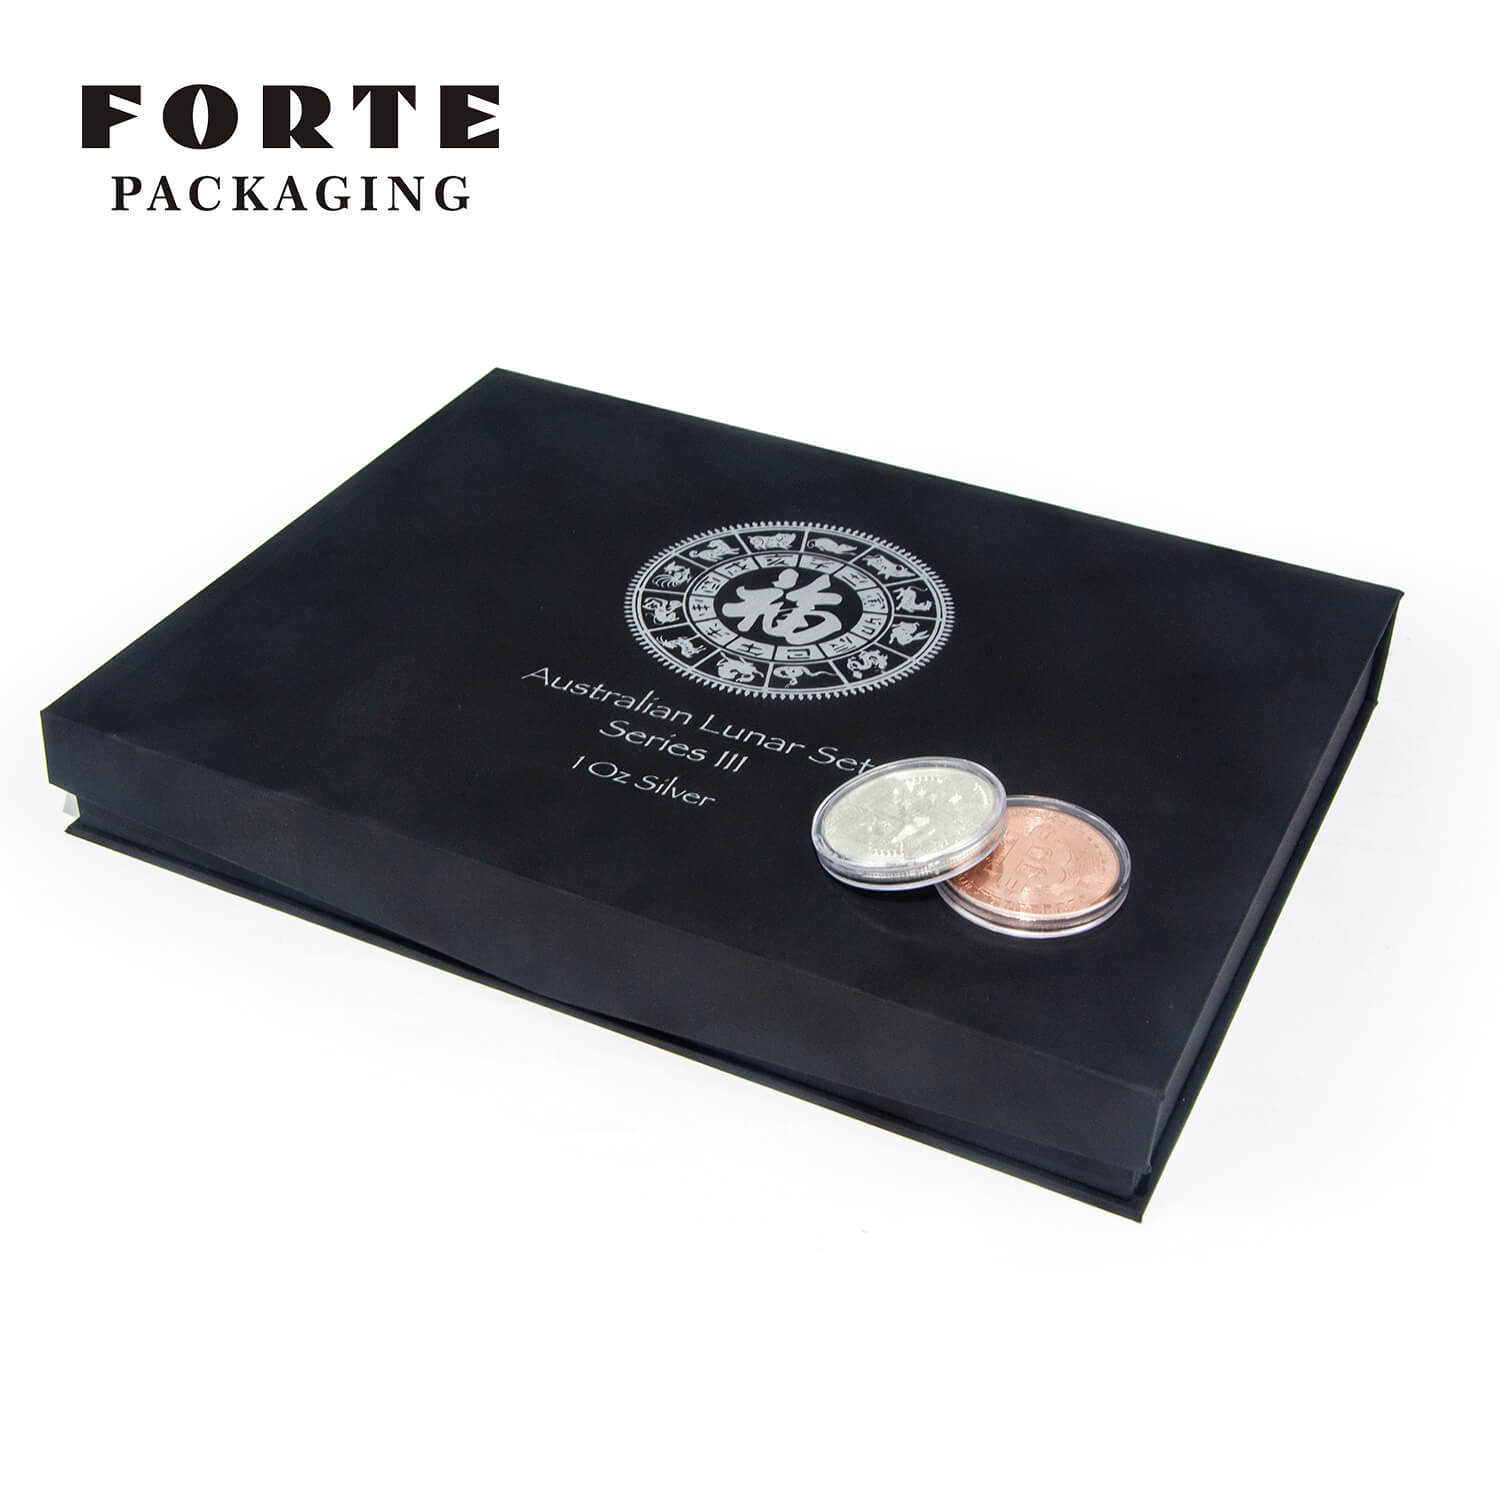 Multifunction Coin Box Tabard jewelry display rack travel gold coin Display black silver coin Clamshell box